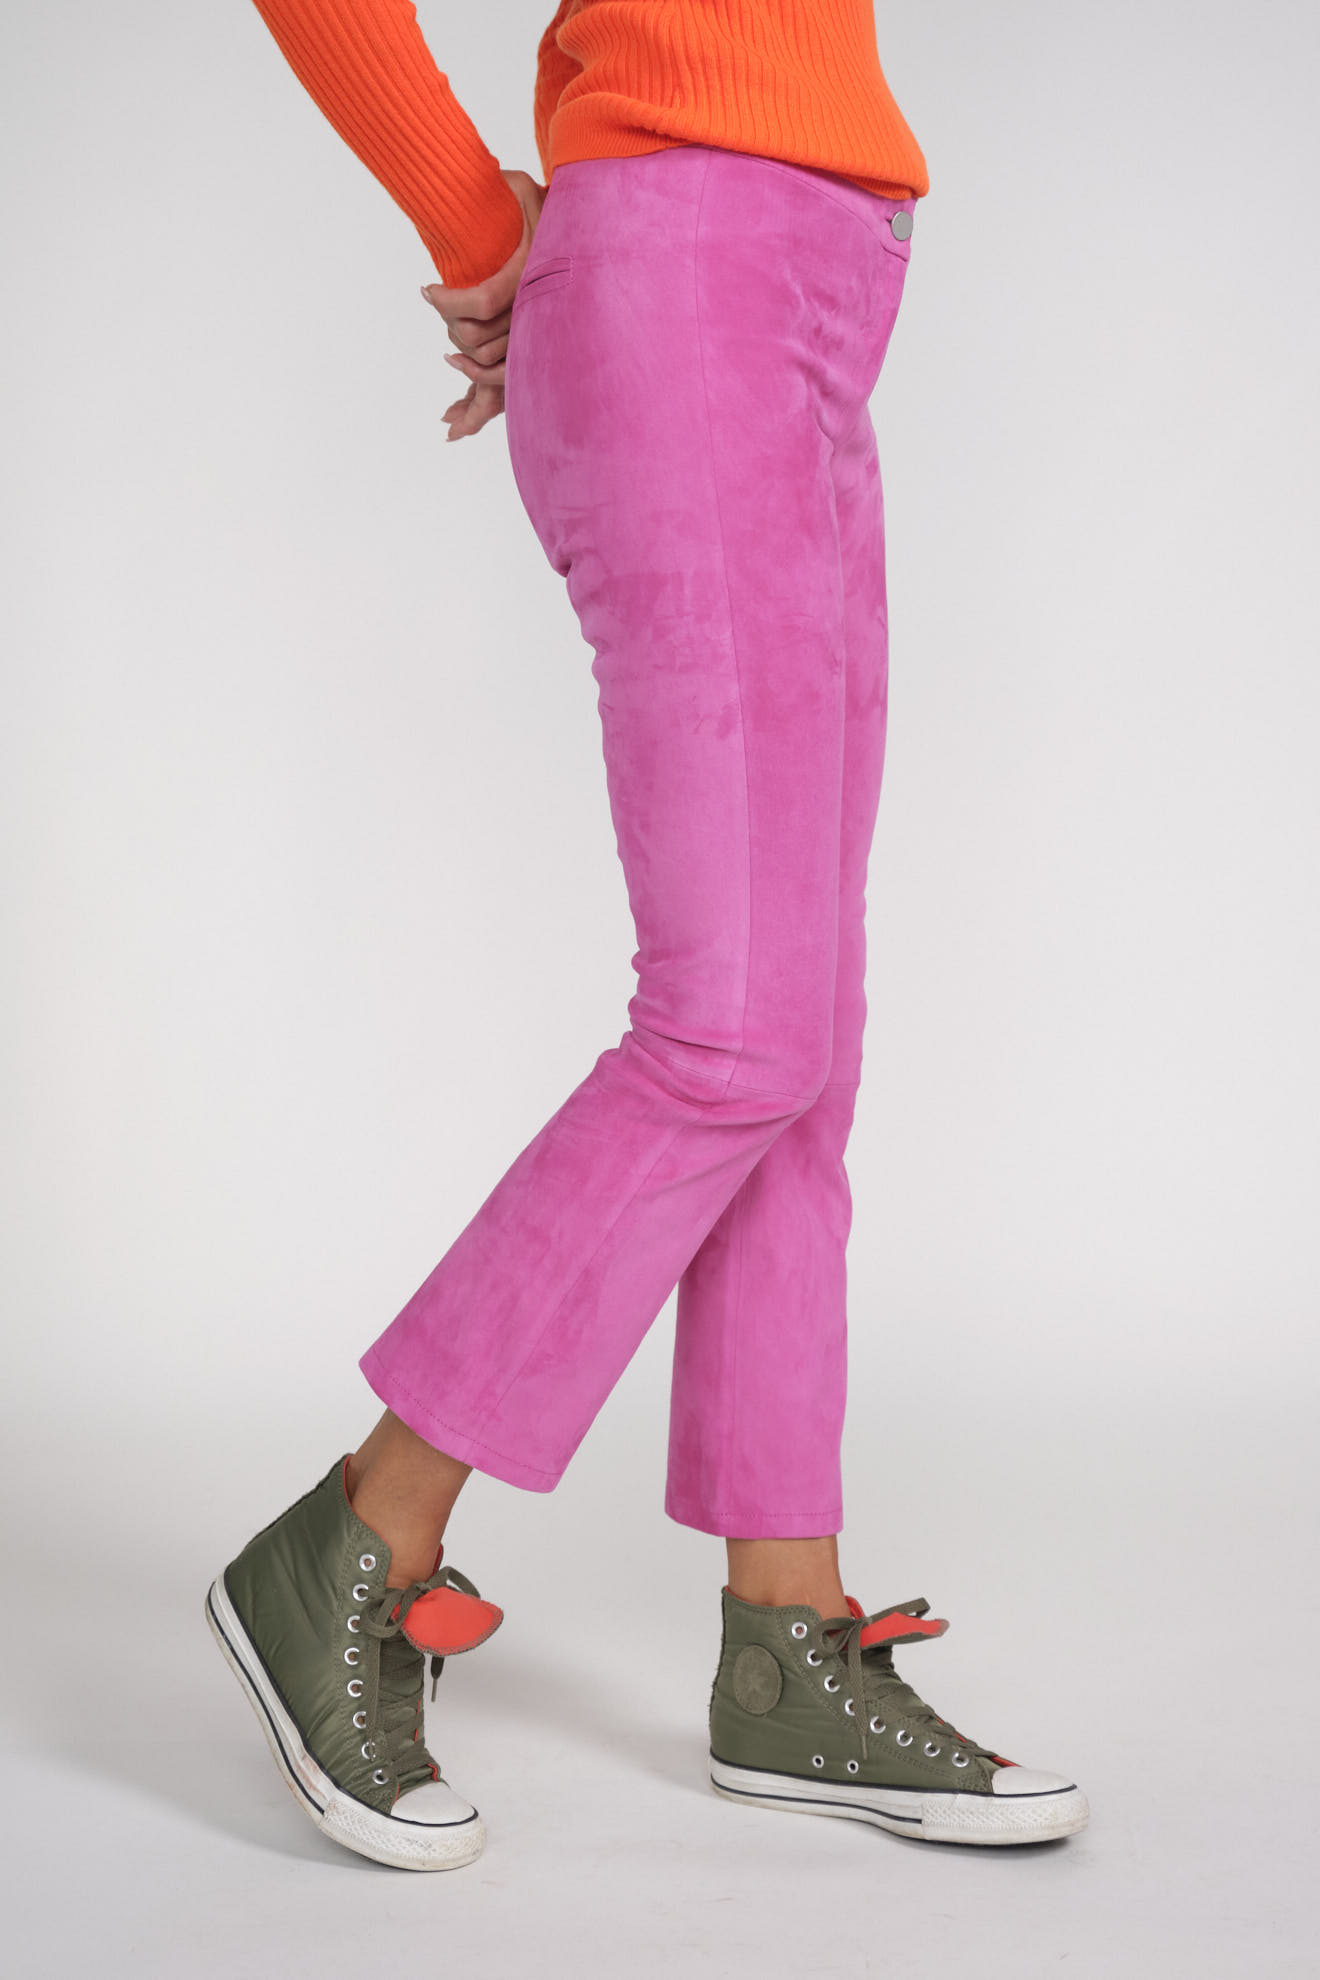 Arma Pants Lively rose 36